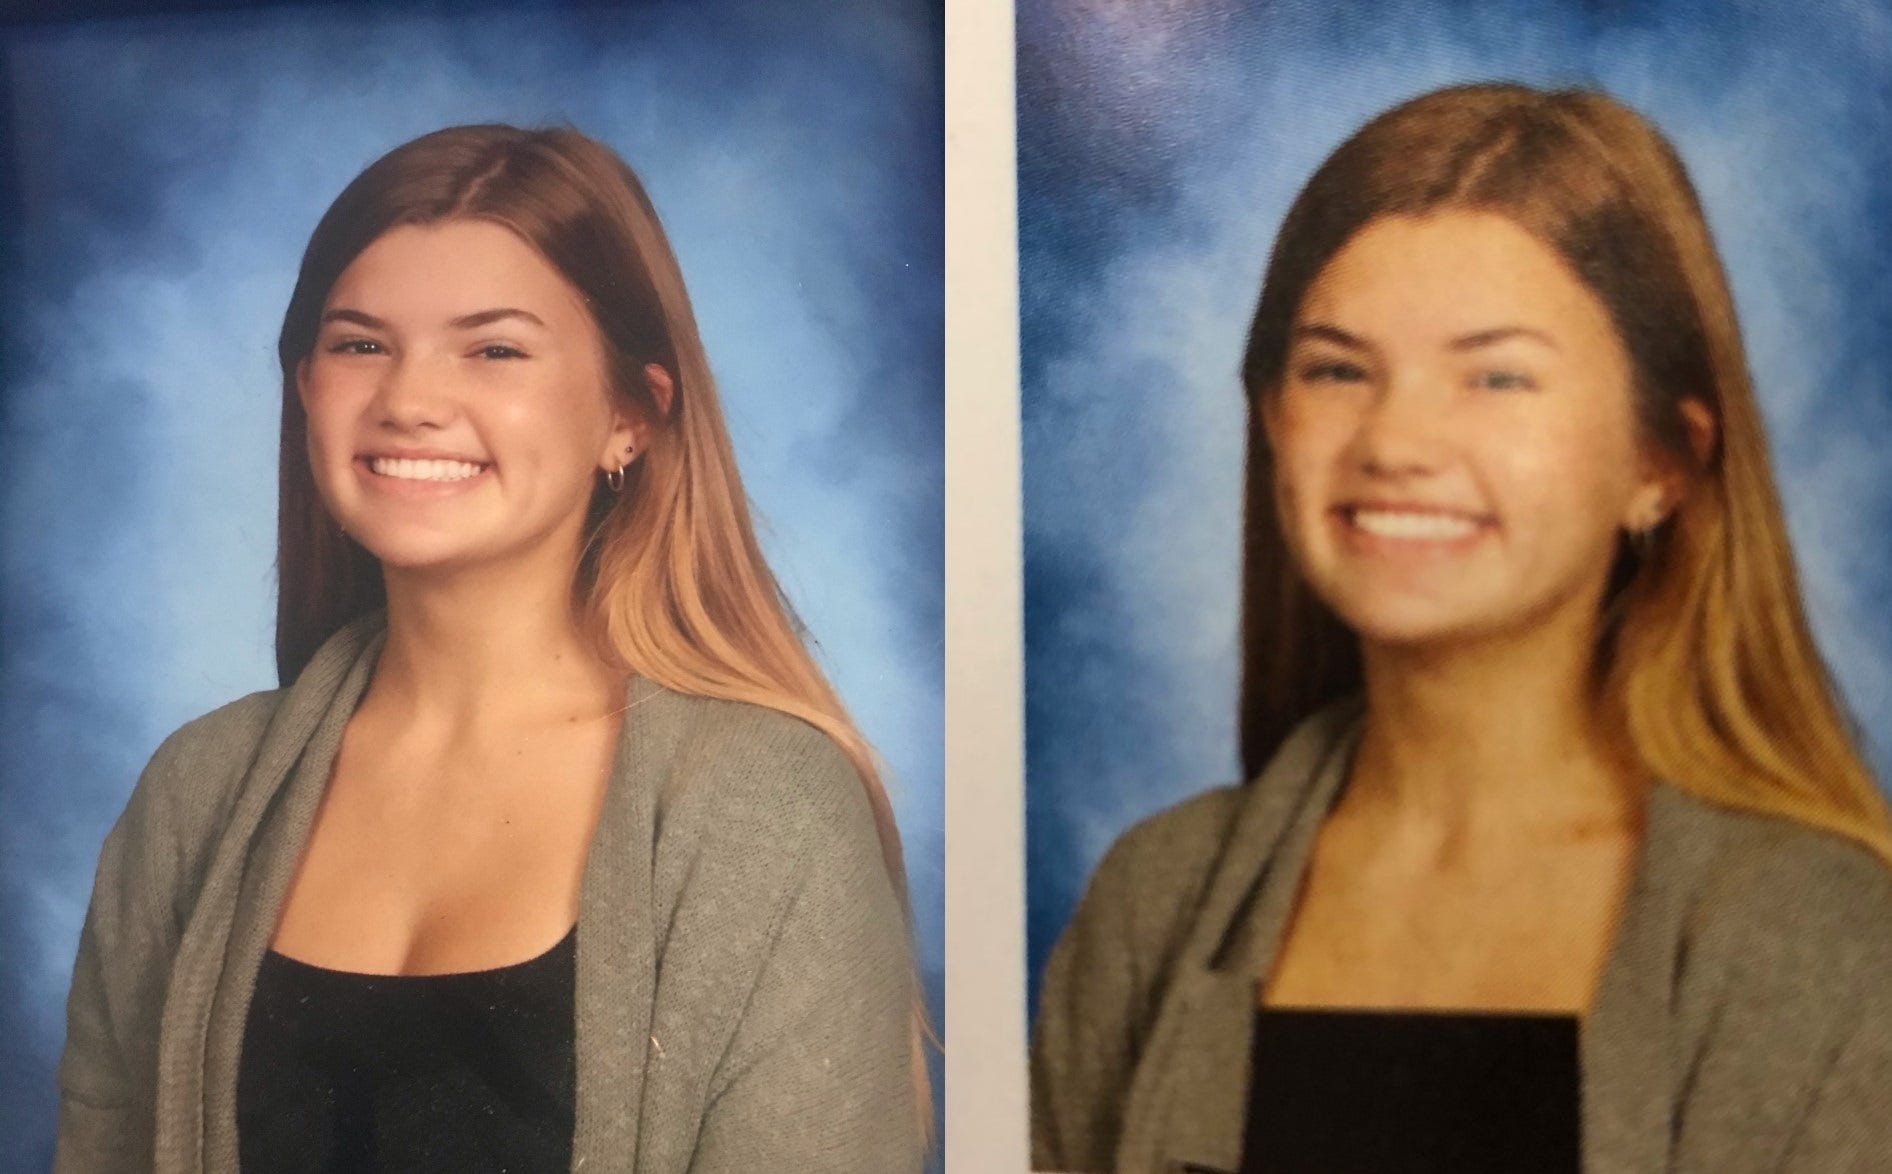 Bartram Trail S Edited Yearbook Photos Reflect Outdated Dress Code